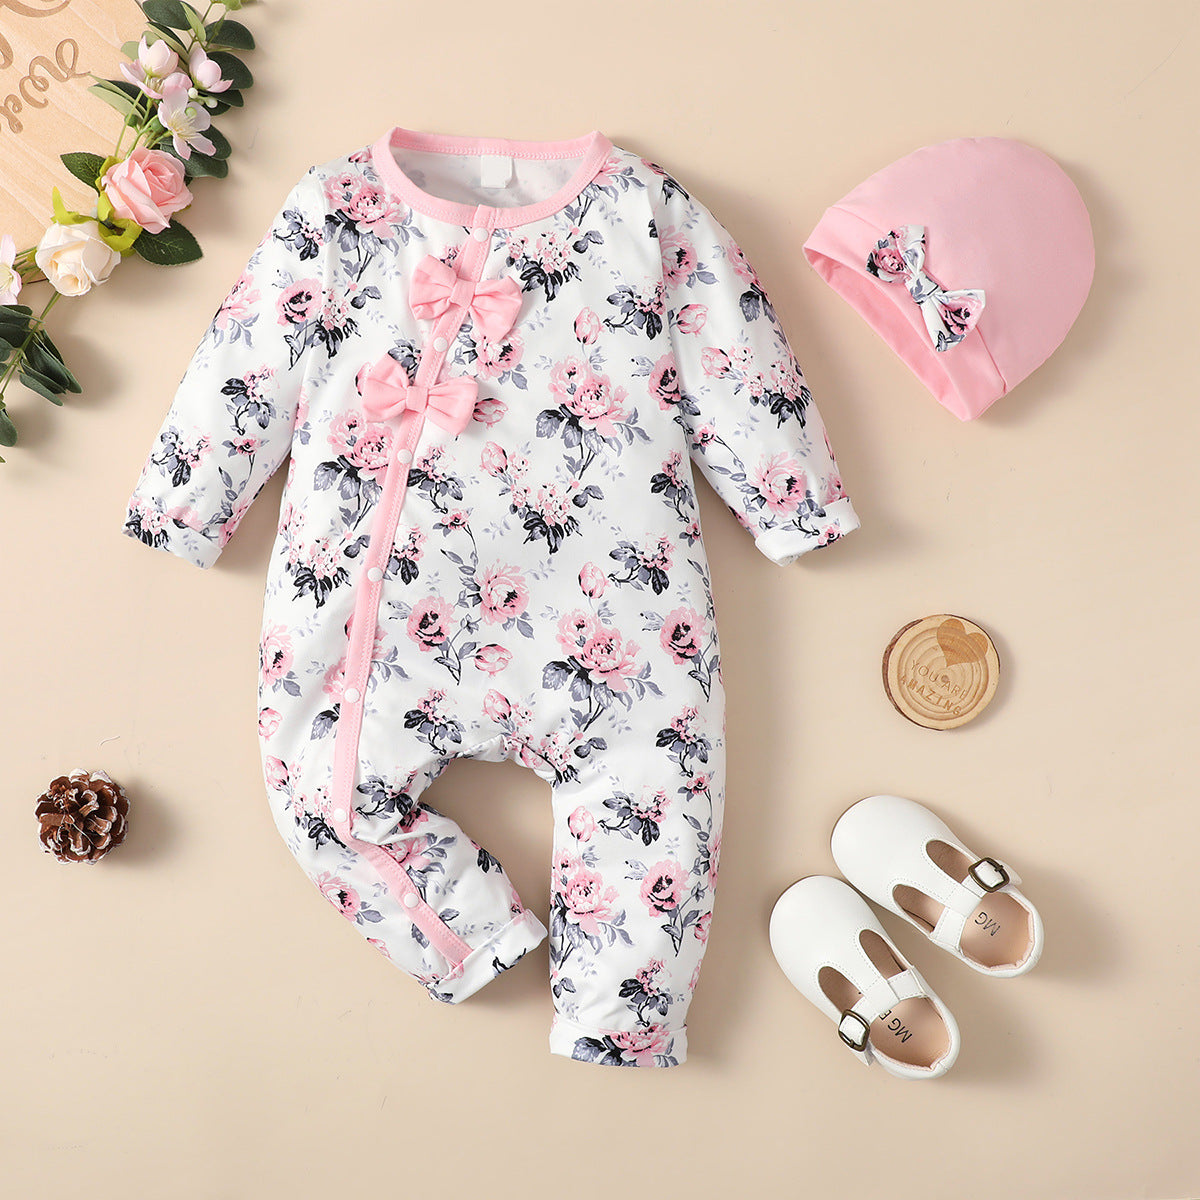 Baby Girl Pink One-piece Outfit with Hat